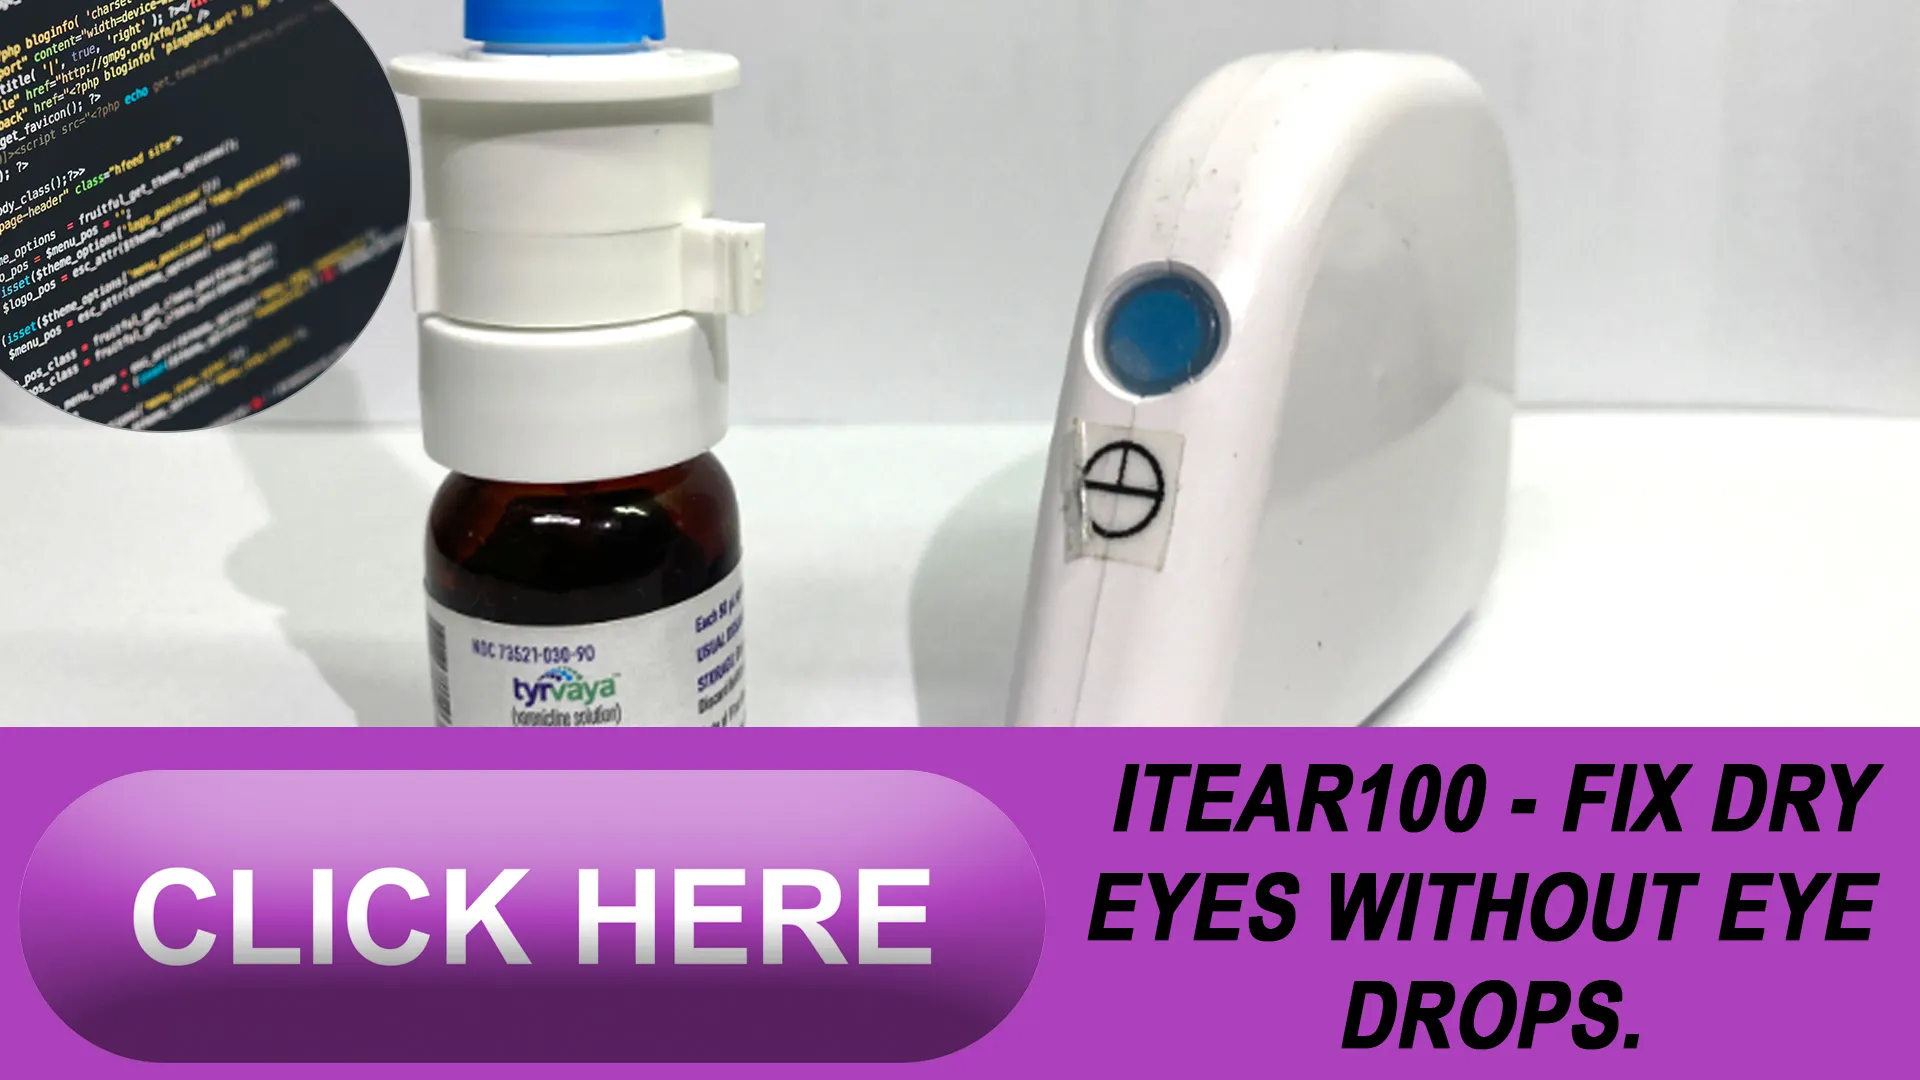 Benefits of the iTEAR100